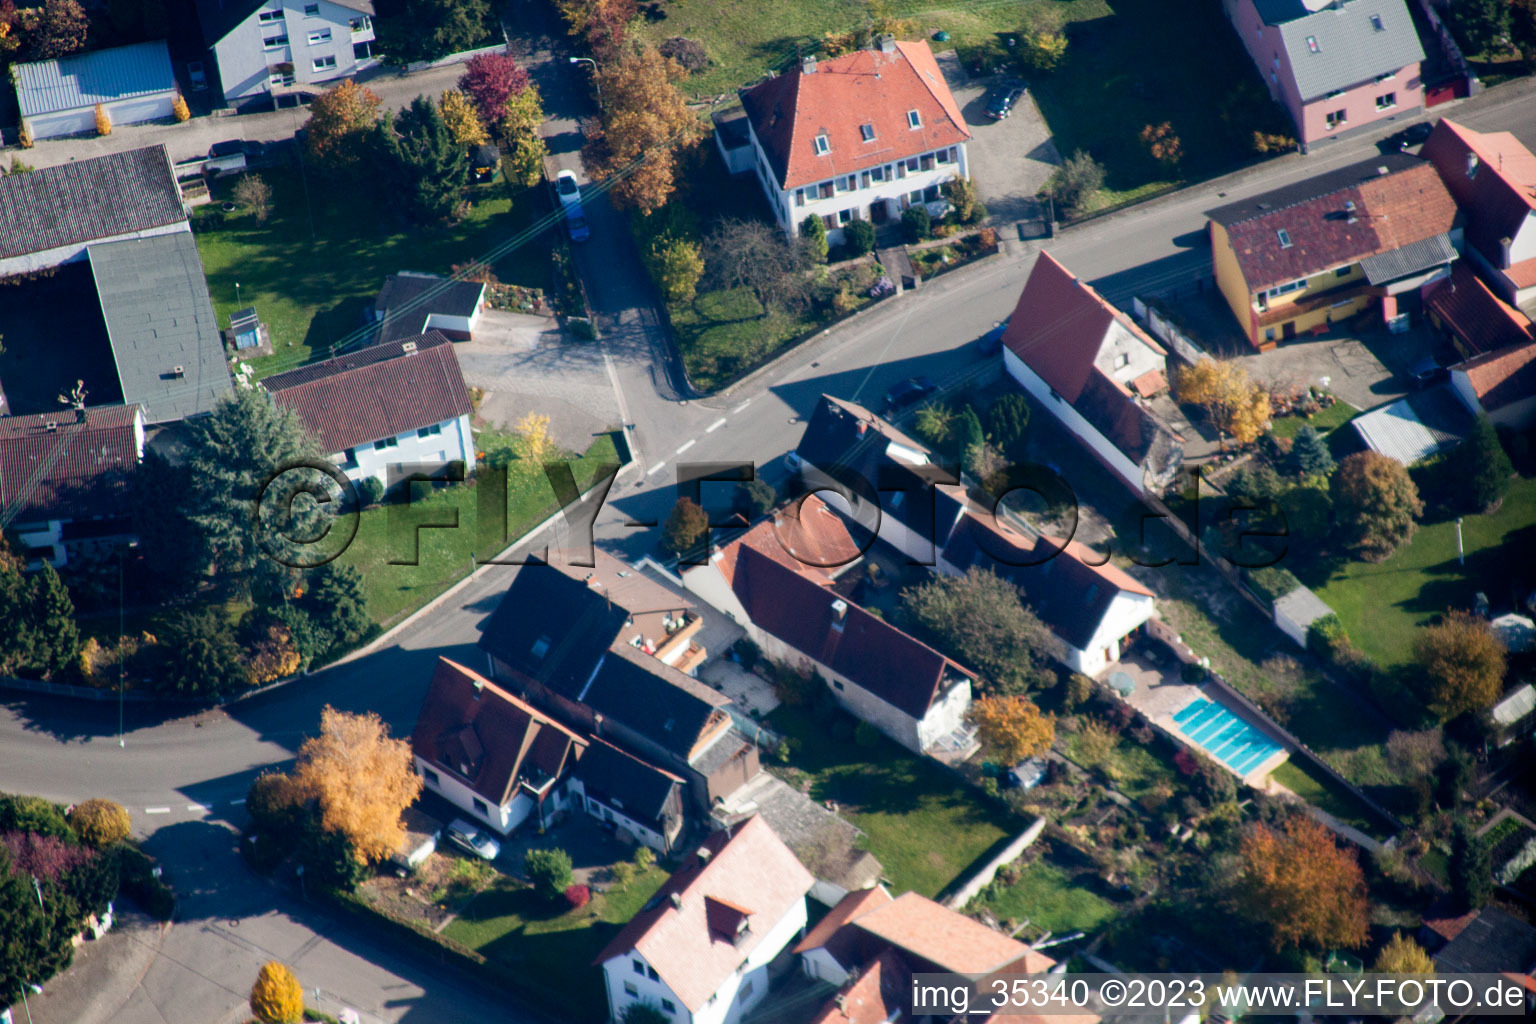 Aerial view of Friedensstr in Hagenbach in the state Rhineland-Palatinate, Germany